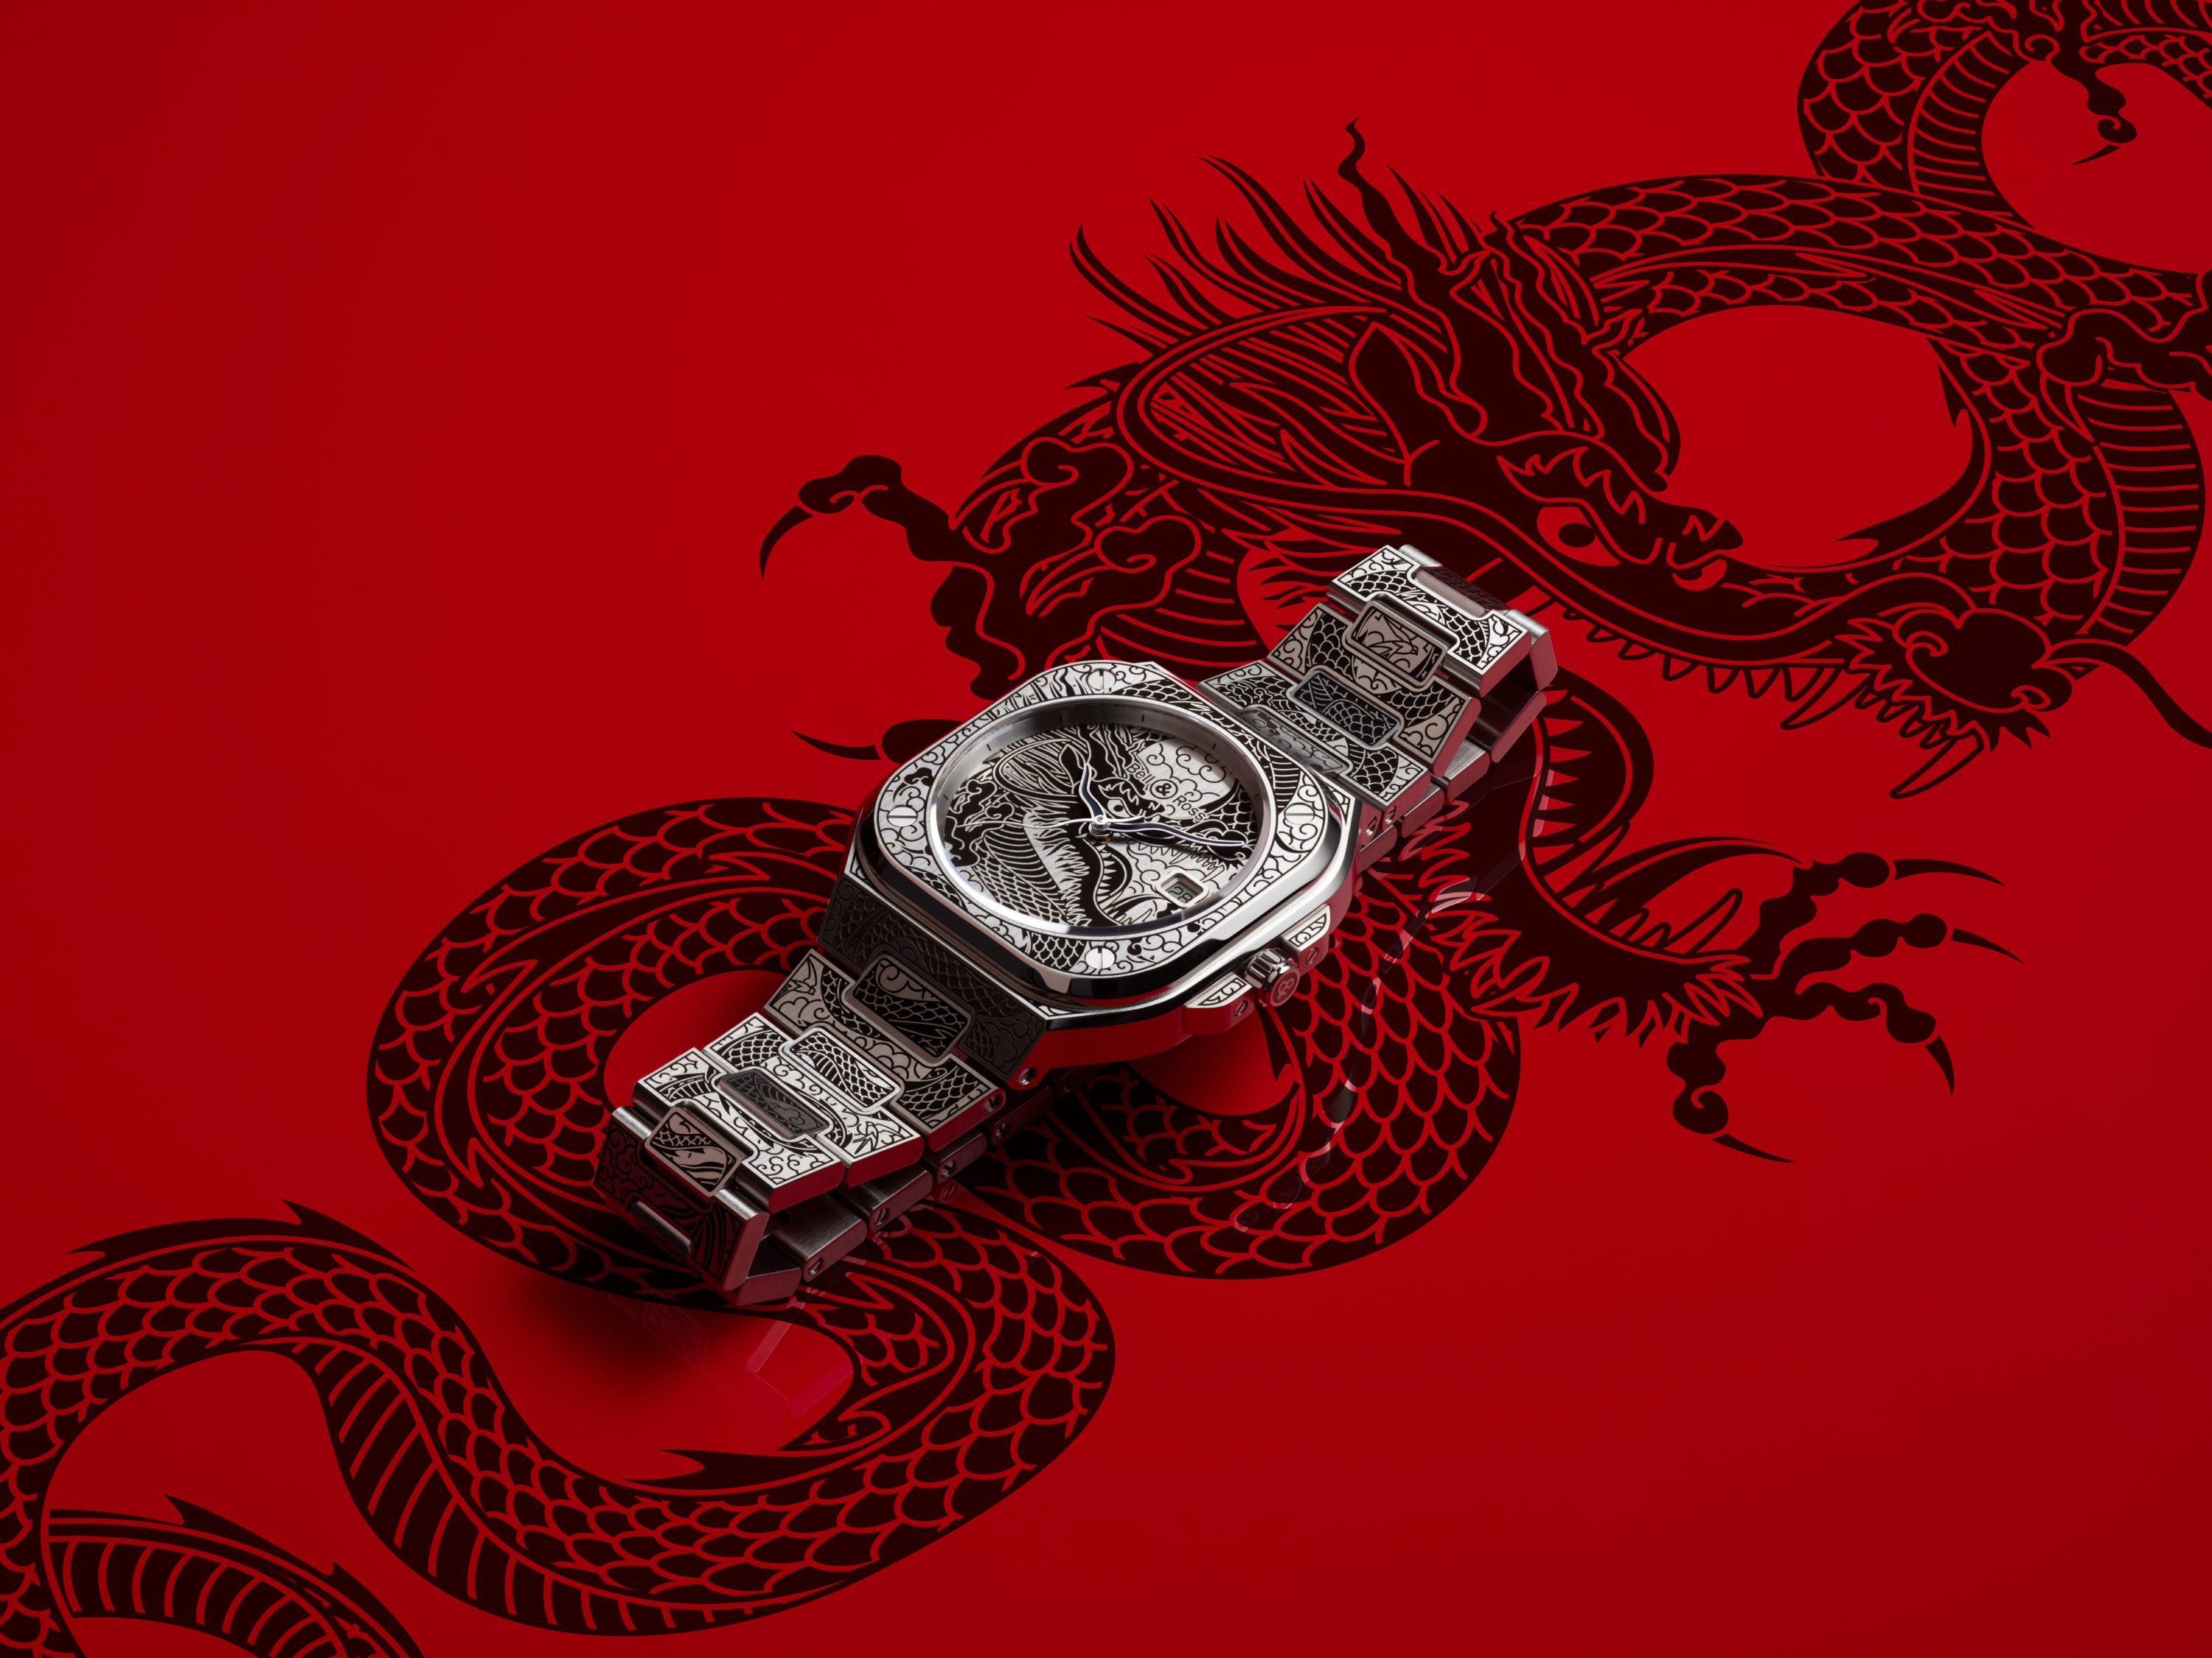 The Art of Tattoo: Bell & Ross Celebrates the Chinese New Year with BR 05 Artline Dragon